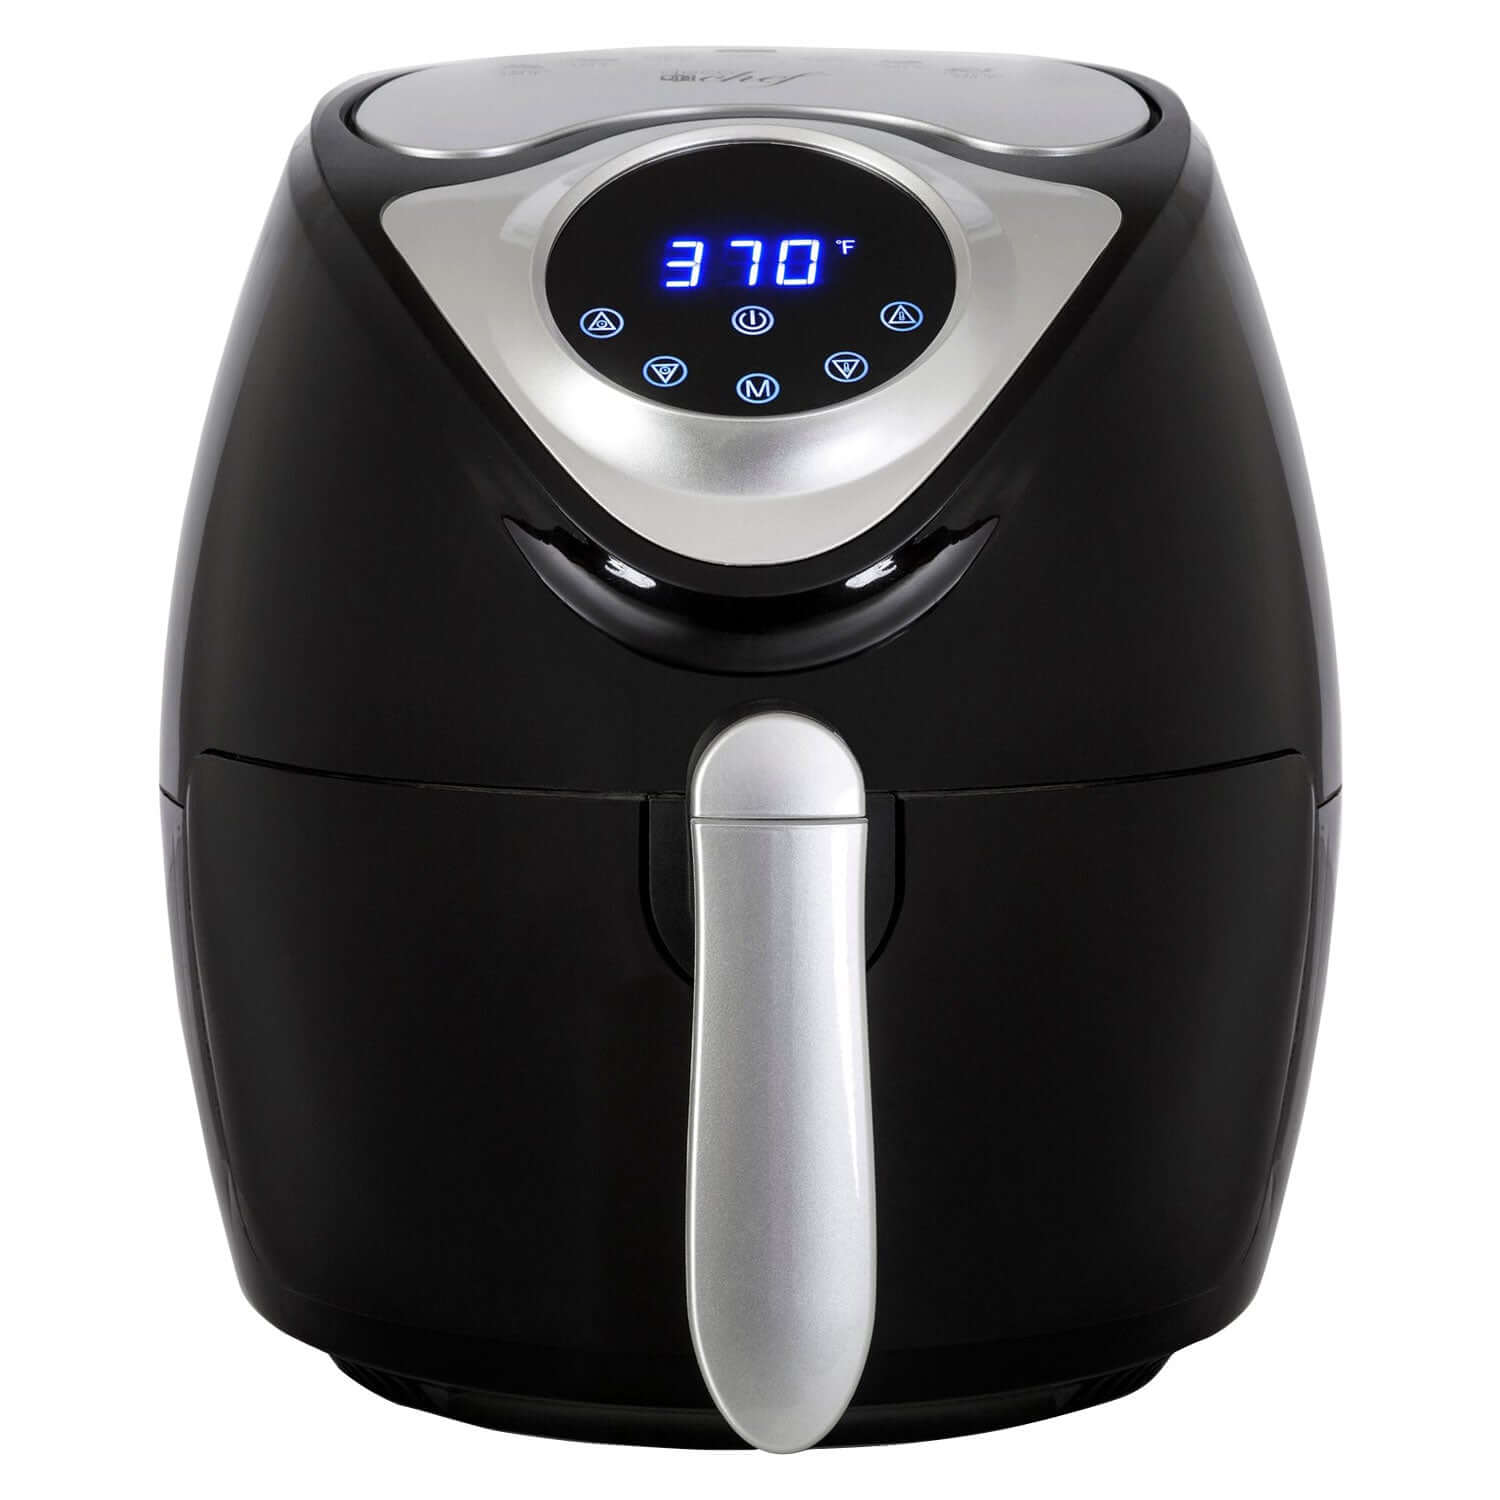  INSIGNIA 3.4 Qt. Digital Air Fryer - Stainless Steel : Home &  Kitchen